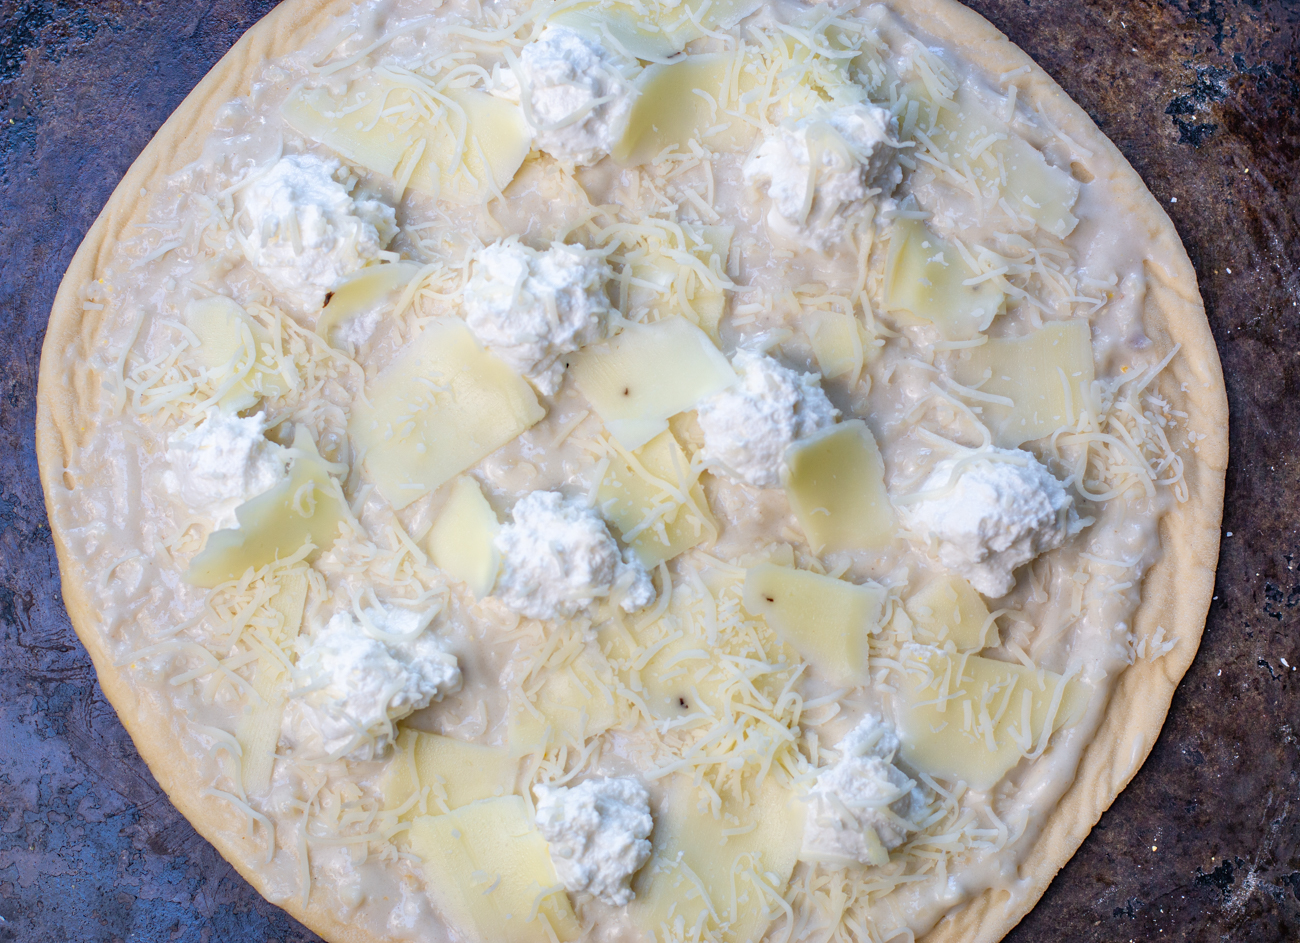 Making the Shaved Asparagus White Pizza - the first step